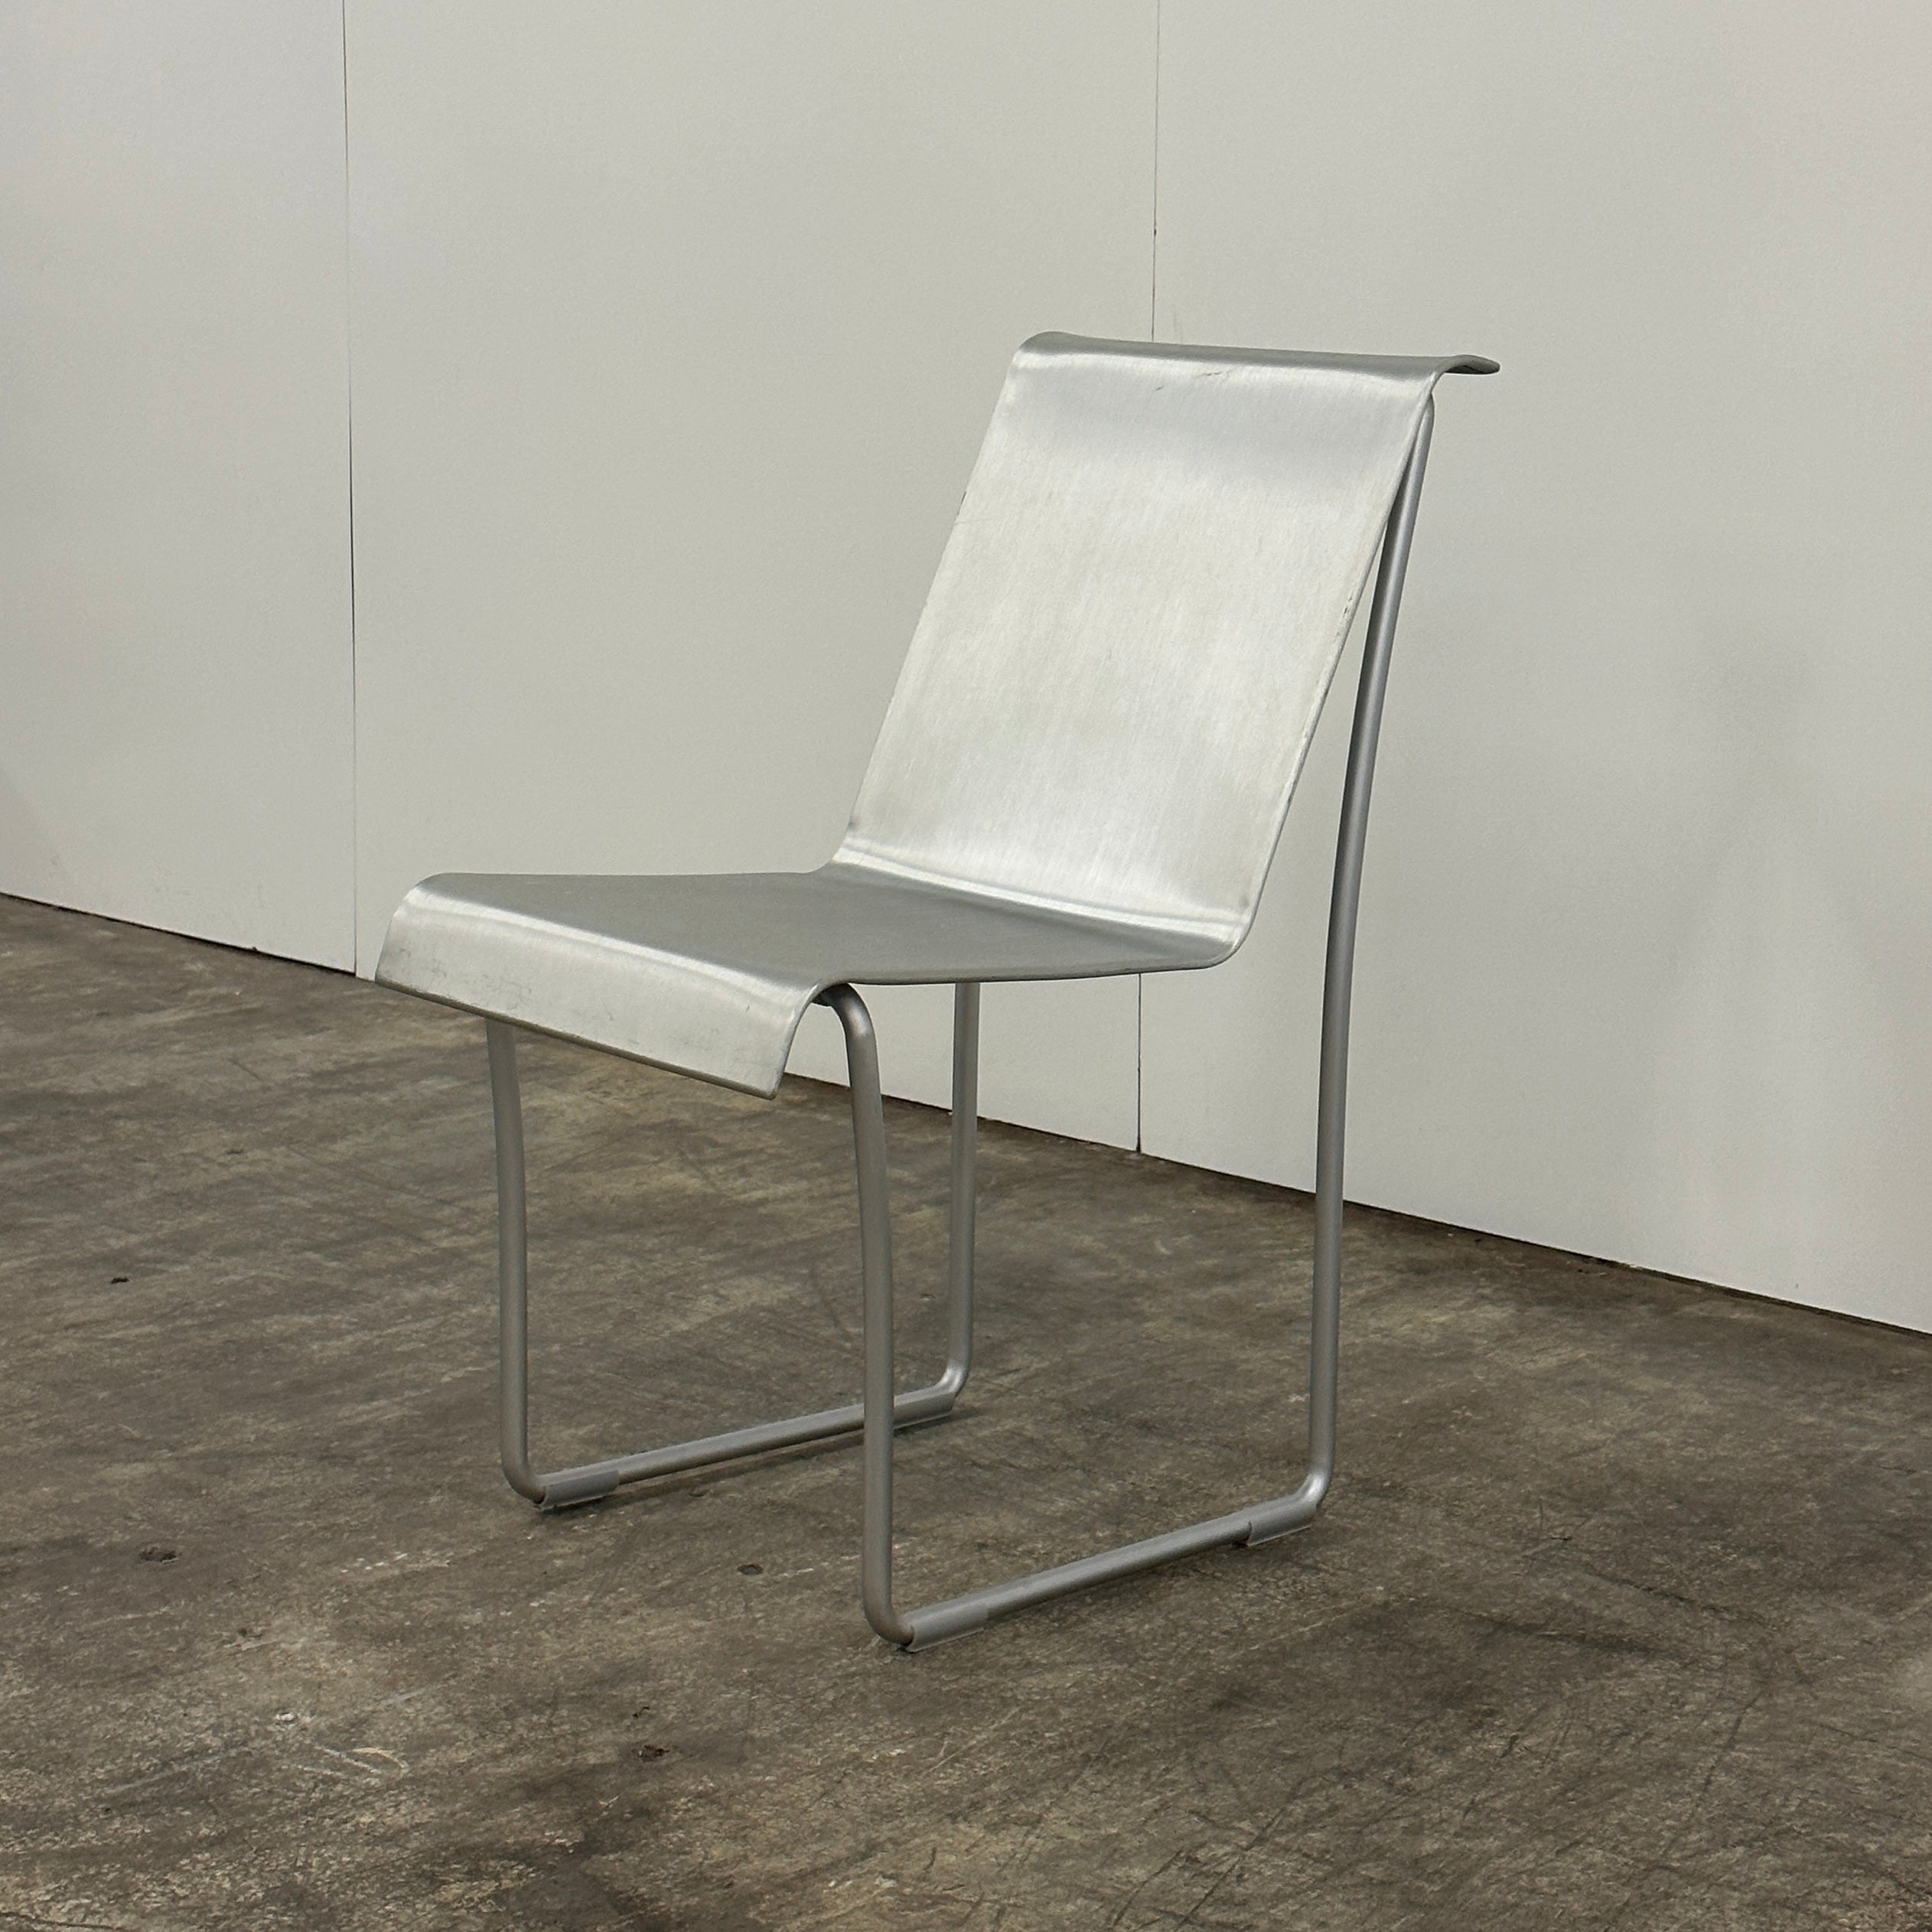 Superlight Chair by Frank Gehry for Emeco – spotexclamationpoint